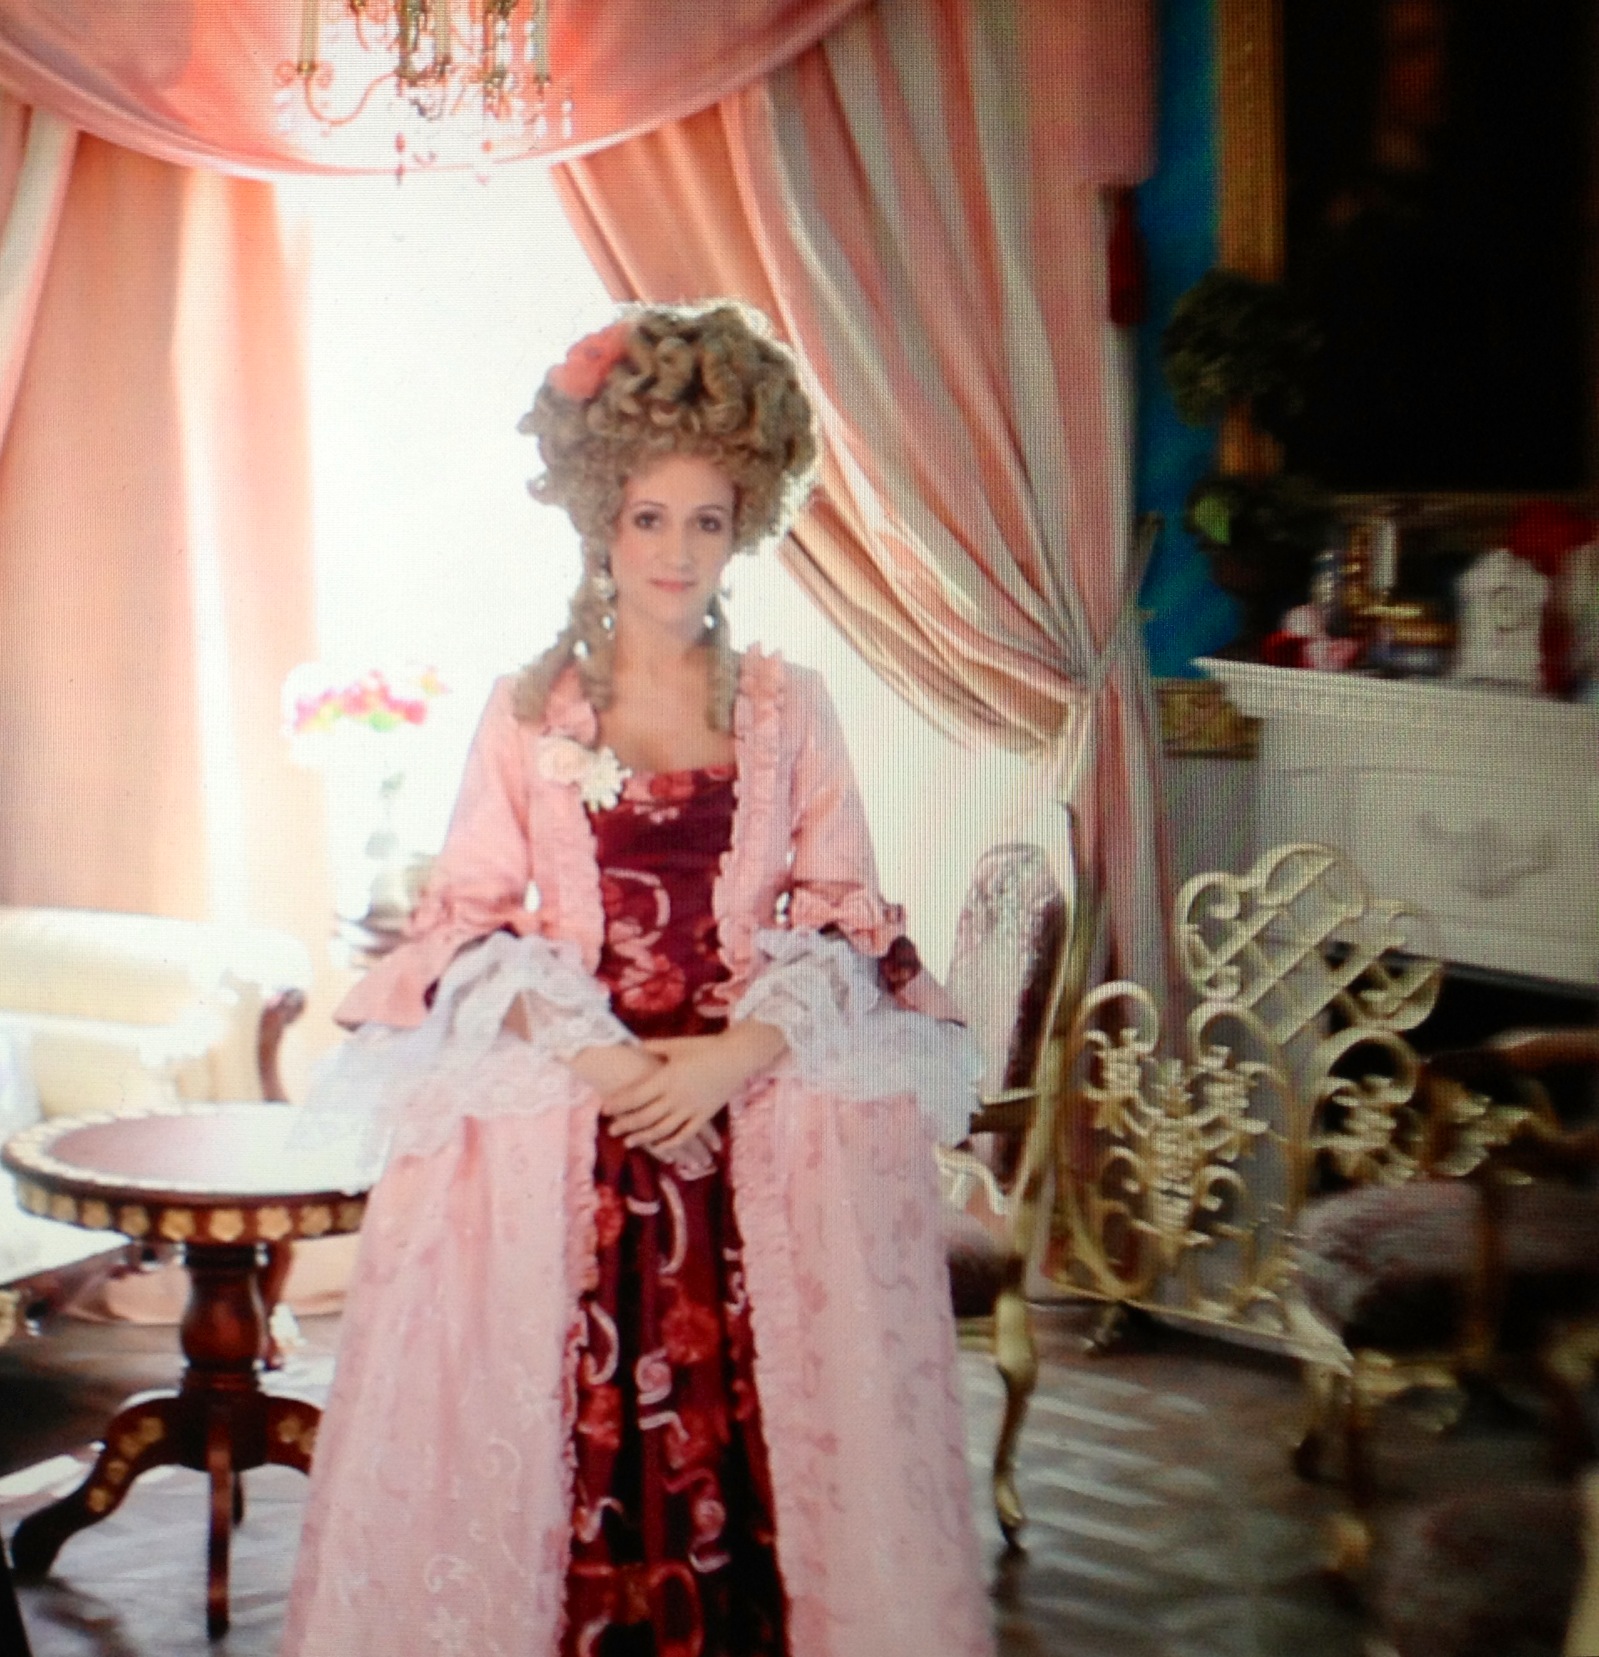 Olivia Rosewood as Marquise de Pompadour on the set of Pastries with Pompadour, 2013